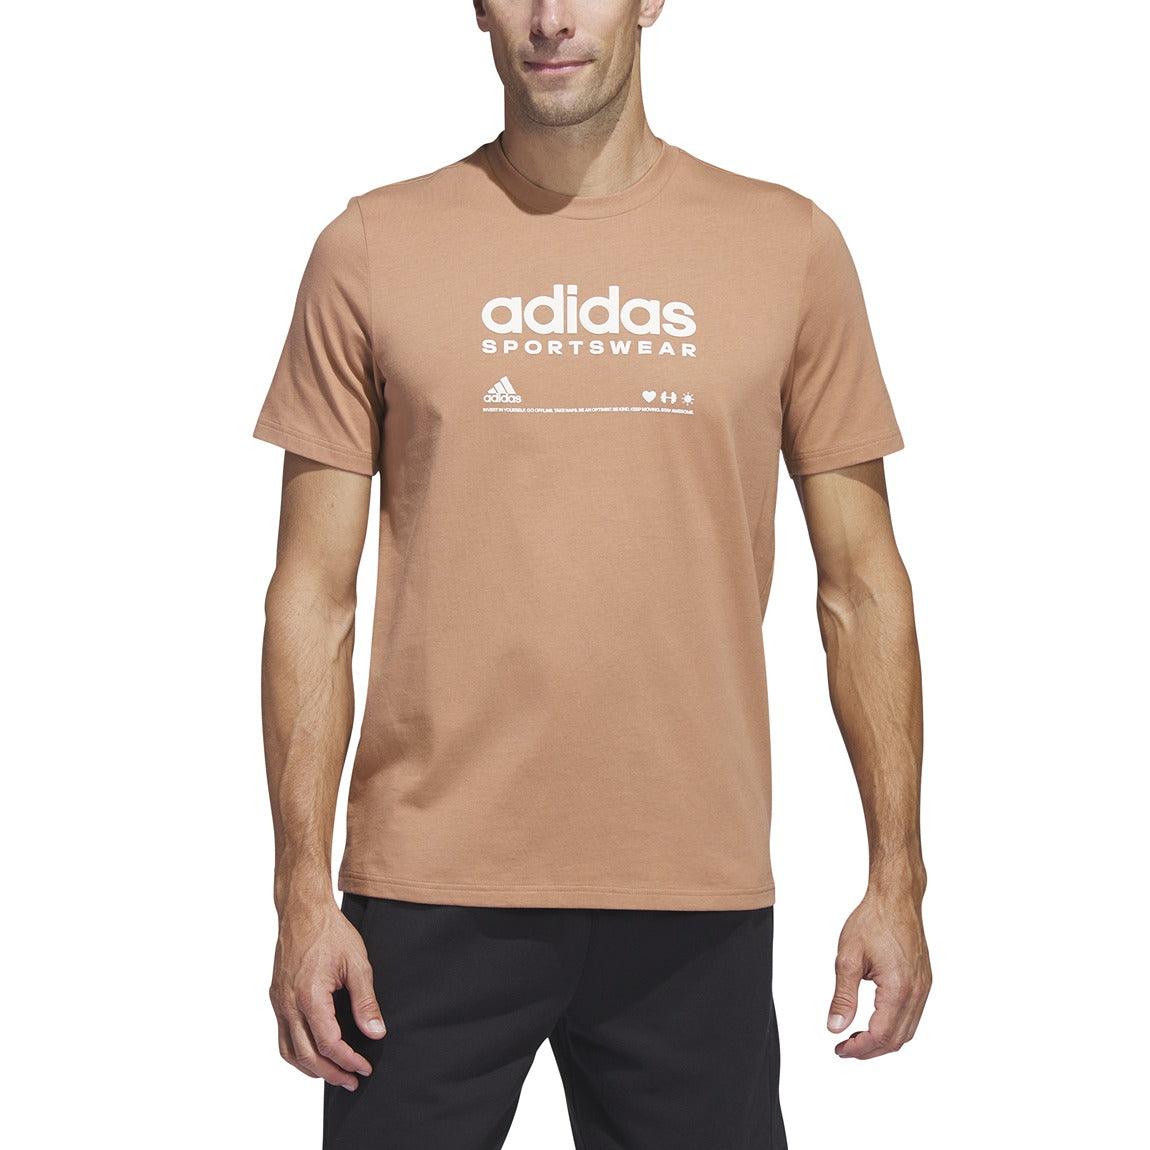 adidas Lounge Graphic T-Shirt - Men - Sports Excellence